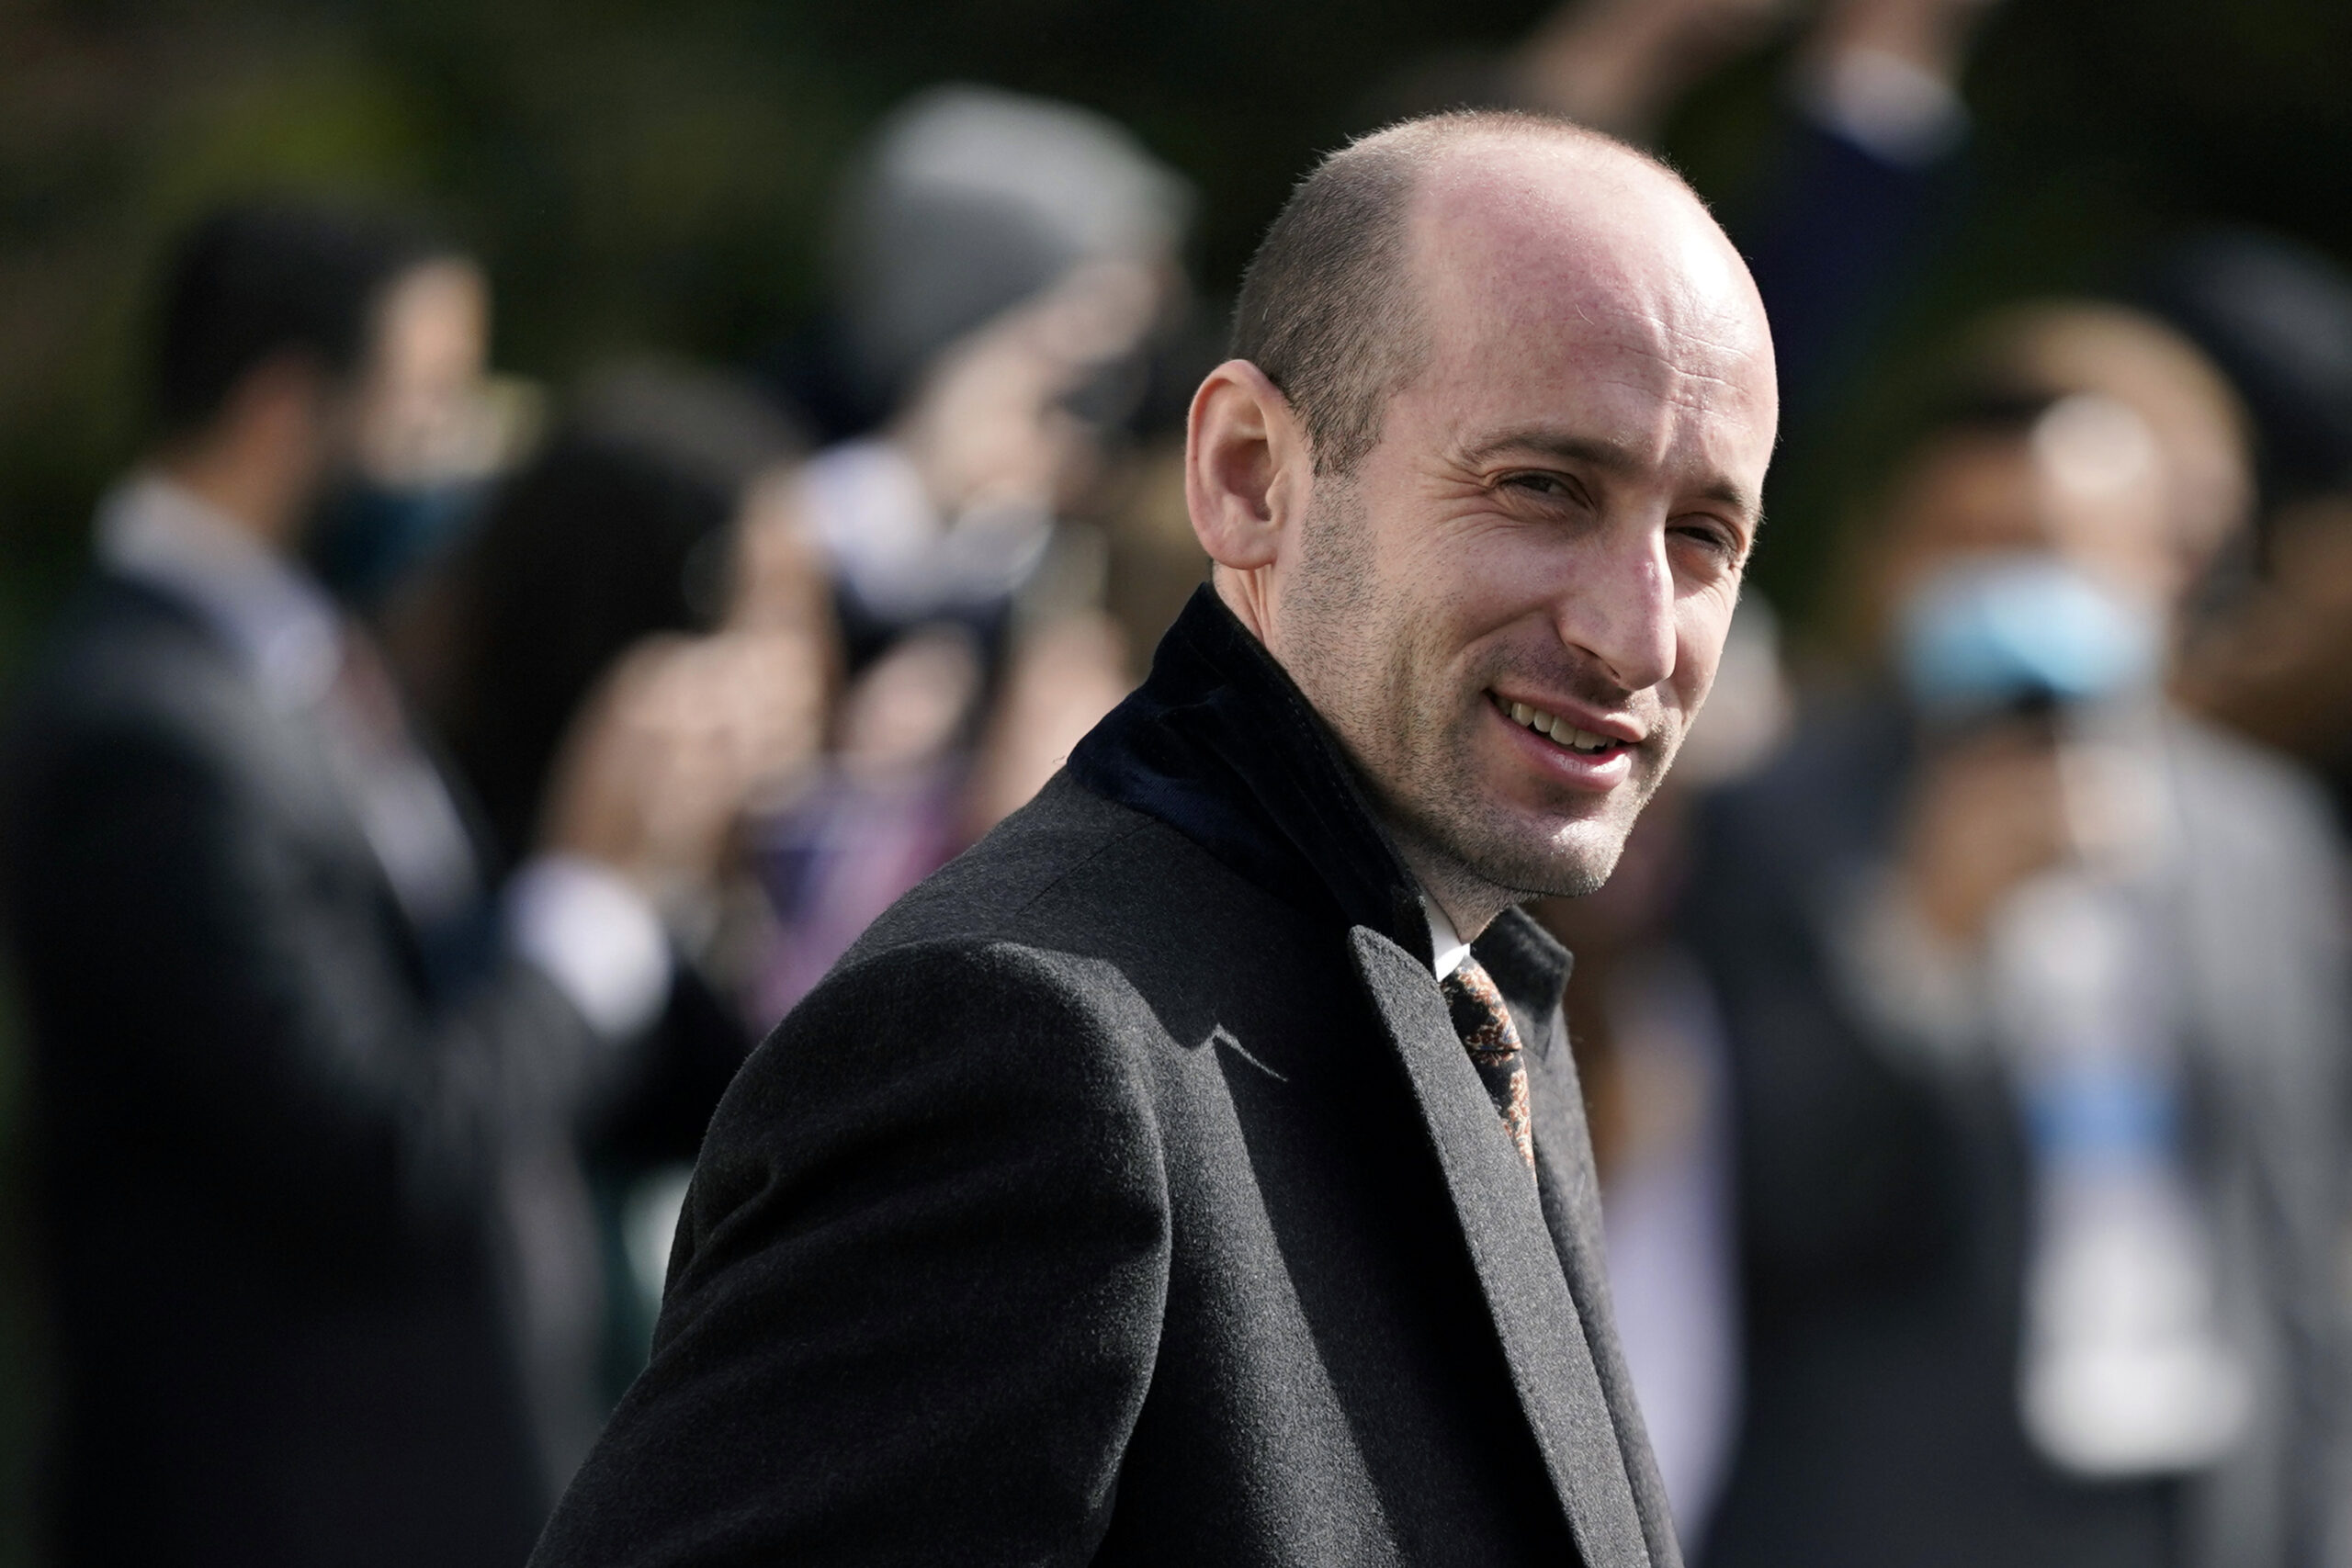 FILE - In this Oct. 30, 2020, file photo, then-President Donald Trump's White House senior adviser Stephen Miller walks on the South Lawn of the White House in Washington. Tens of thousands of Afghan refugees fleeing the Taliban are arriving in the U.S., and a handful of former Trump administration officials are working to turn Republicans against them. (AP Photo/Patrick Semansky, File)